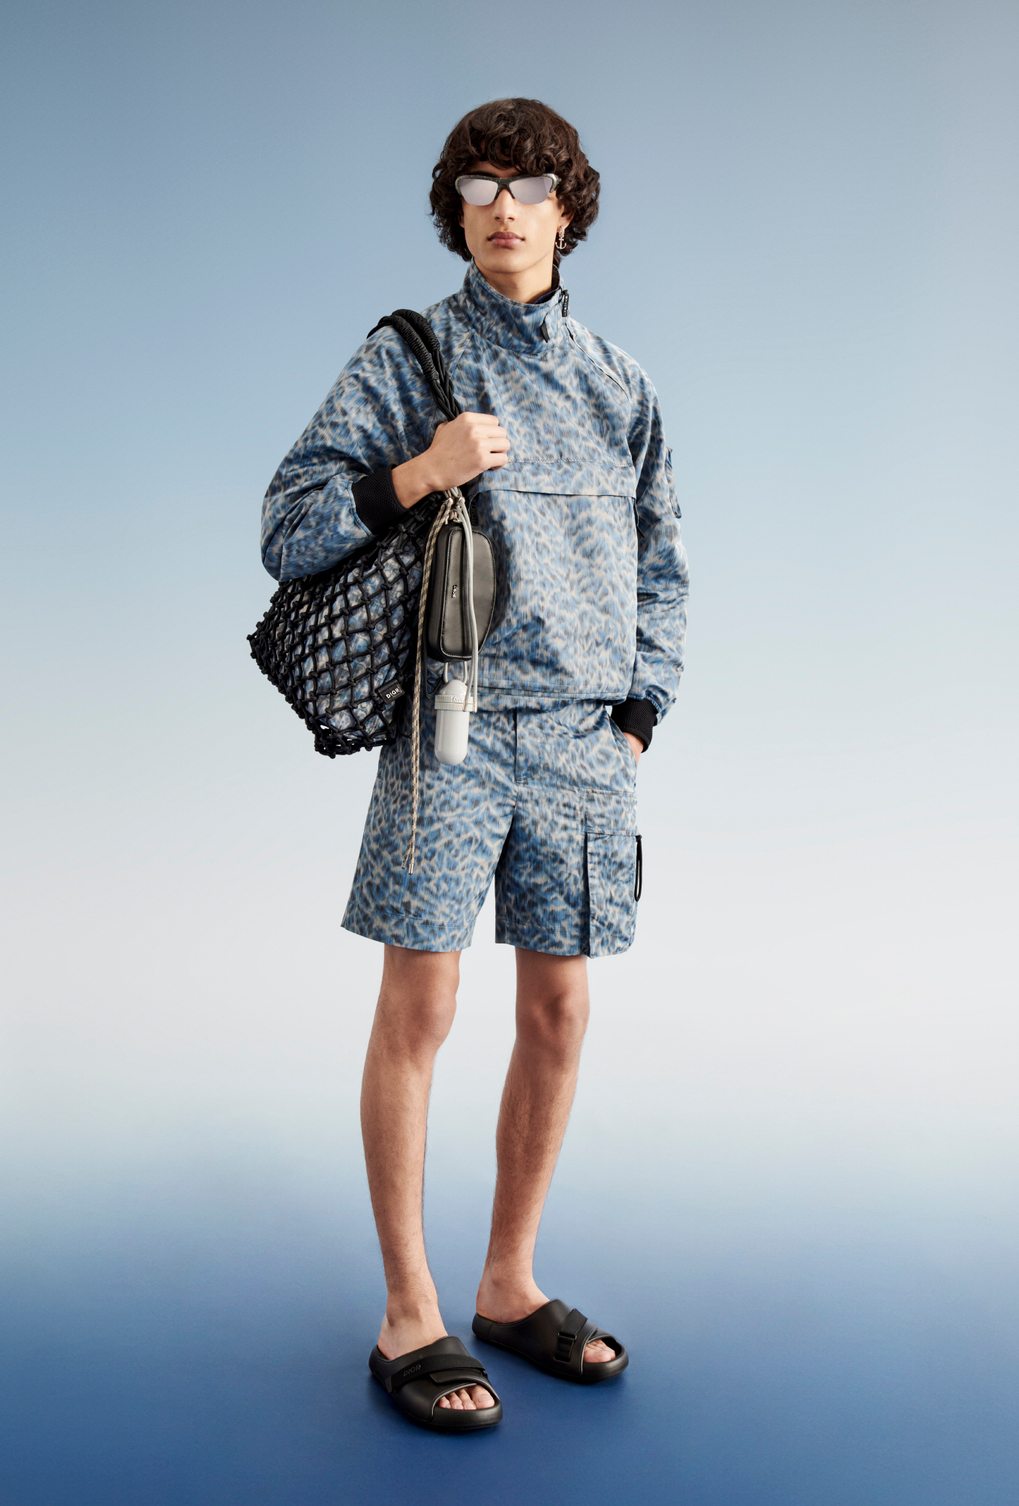 Dior collabore avec l'ONG Parley for the Oceans pour sa collection capsule homme beachwear 